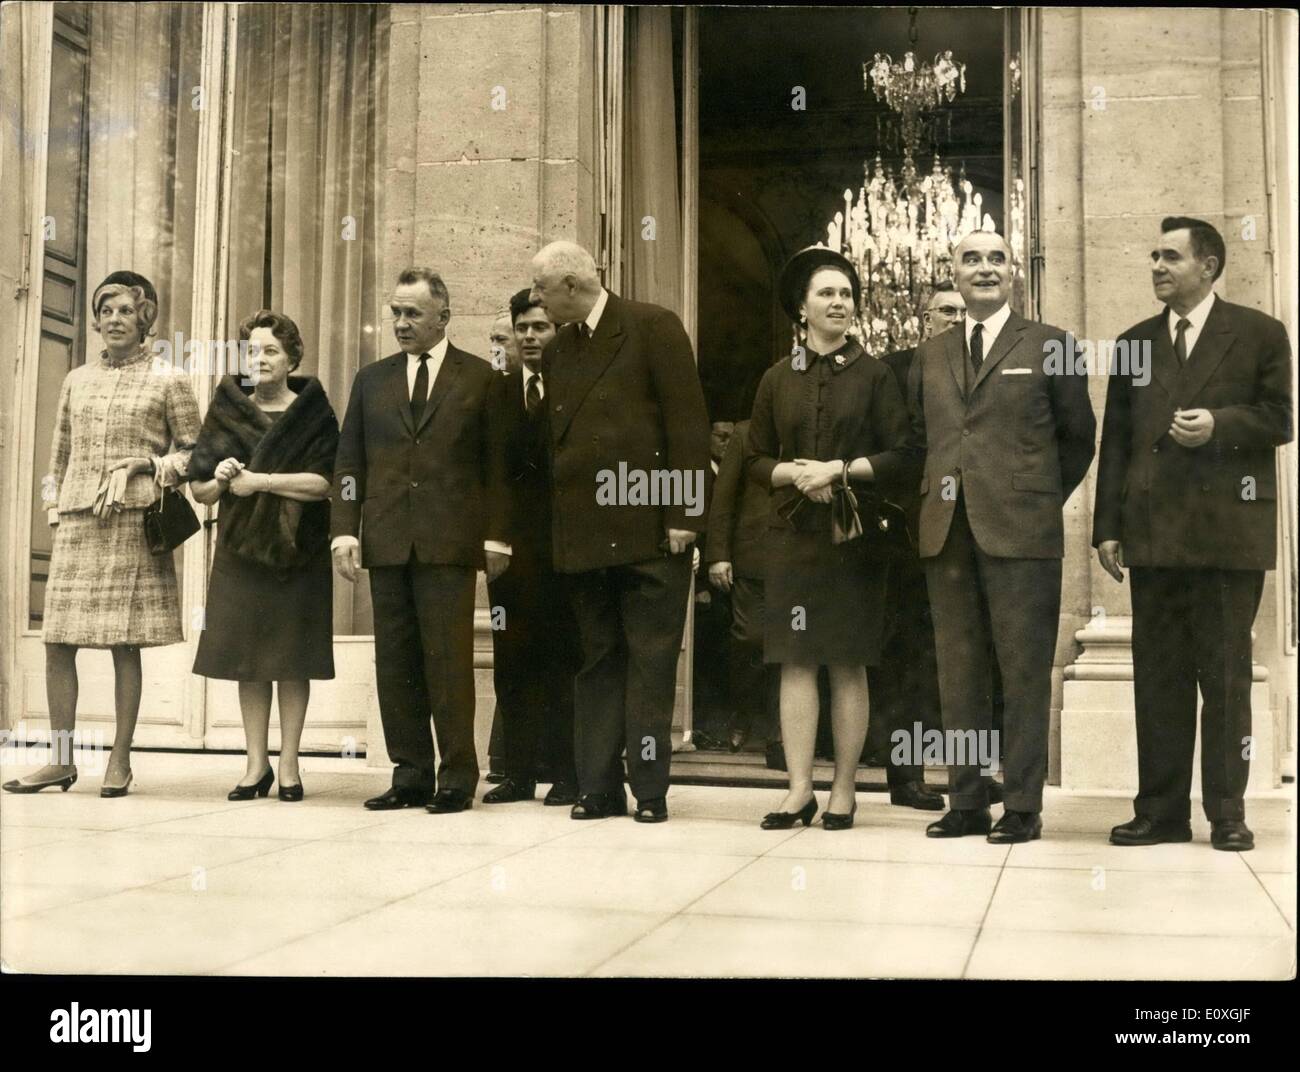 Dec. 12, 1966 - Kosygin on nine-day to France: Soviet premier ALEXEI KOSYGIN arrived in Paris for a nine-day visit to France: Pictured on the steps of the Elysee Palace from L.to R. : Mme Pompidou, wife of French Prime Minister, Mme De Gaulle, Kosygin, De Gaulle, Ludmilla Gvichiani (Kosygin's daughter who accompanies her father Mme Kosygin being ill); Prime Minister Pompidou and Andrei Gromyko, Soviet Foreign Minister. Stock Photo